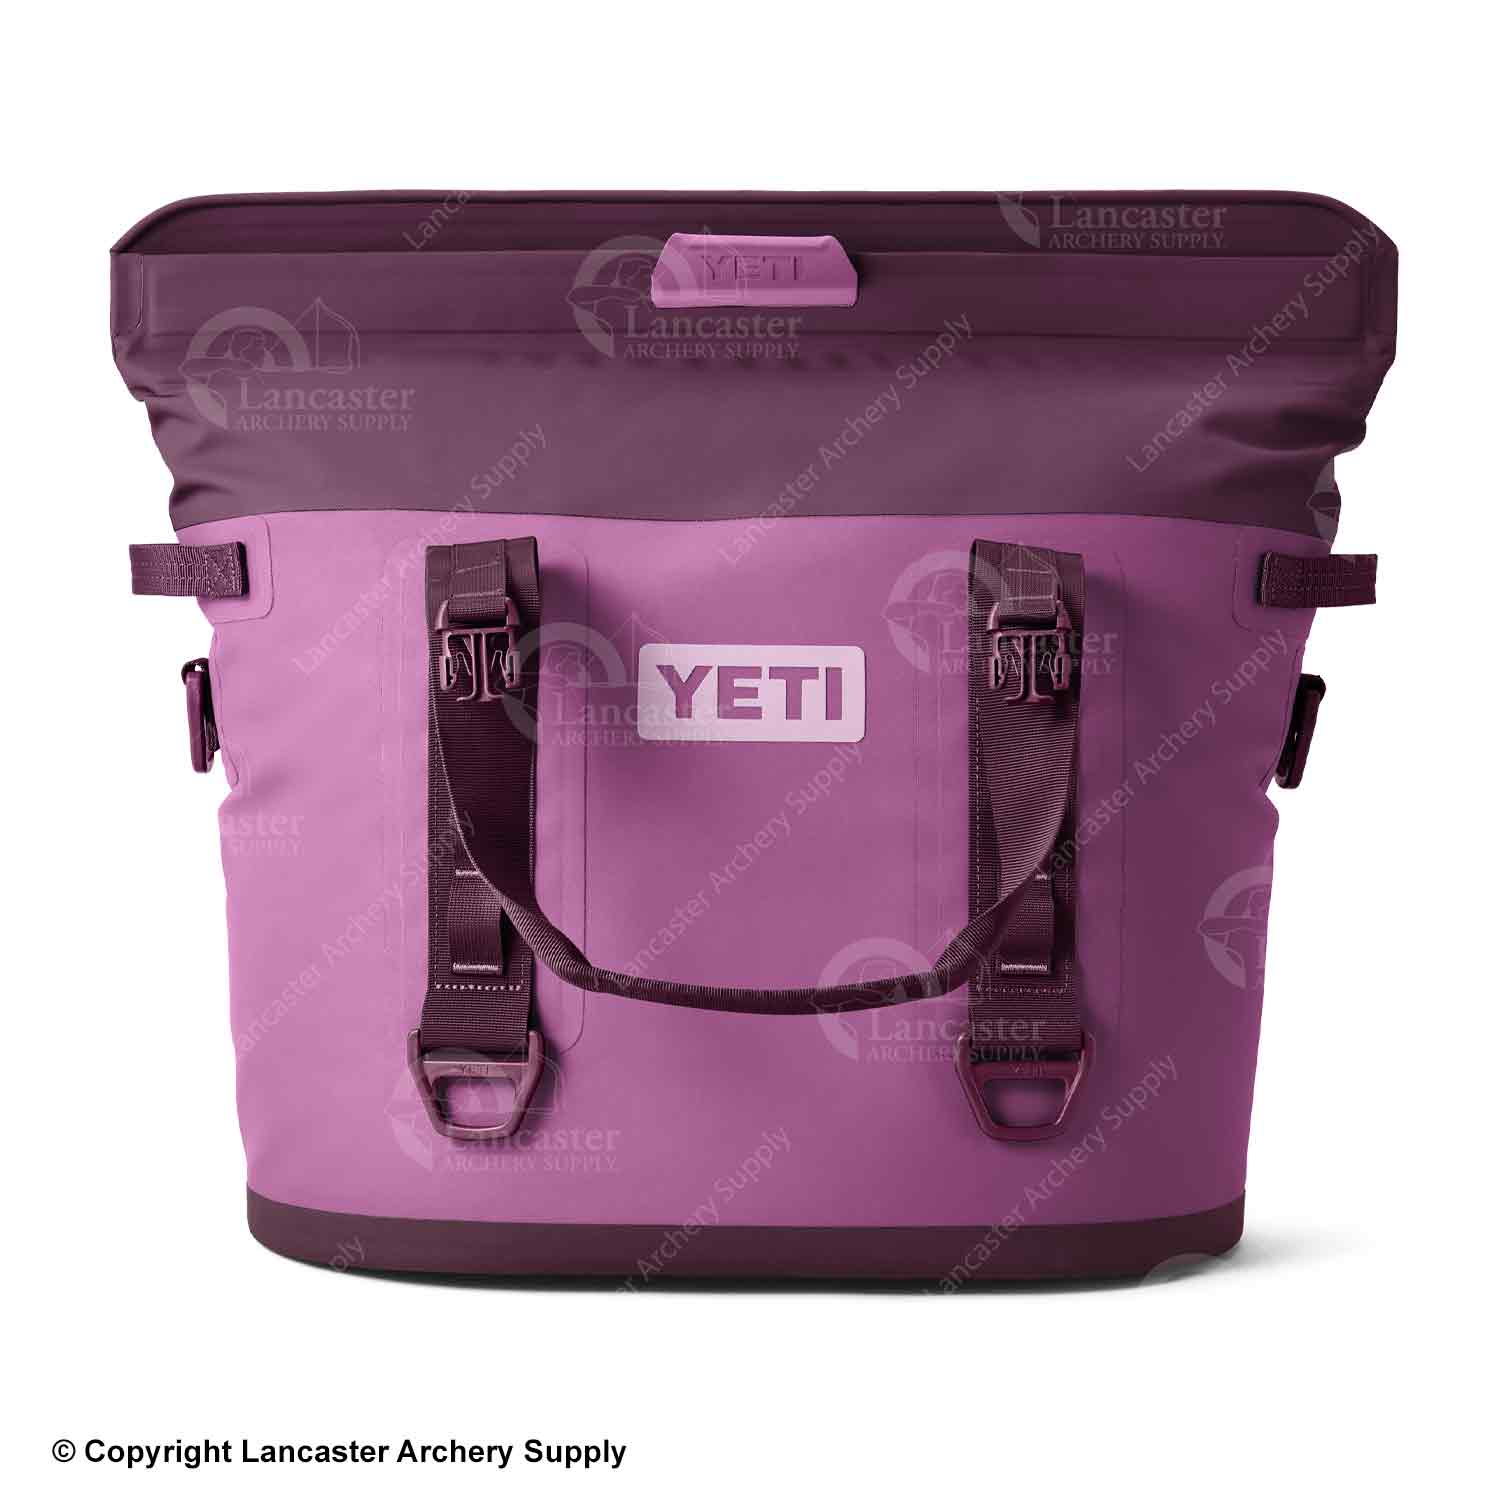 YETI Hopper M30 Insulated Bag Cooler, Navy at